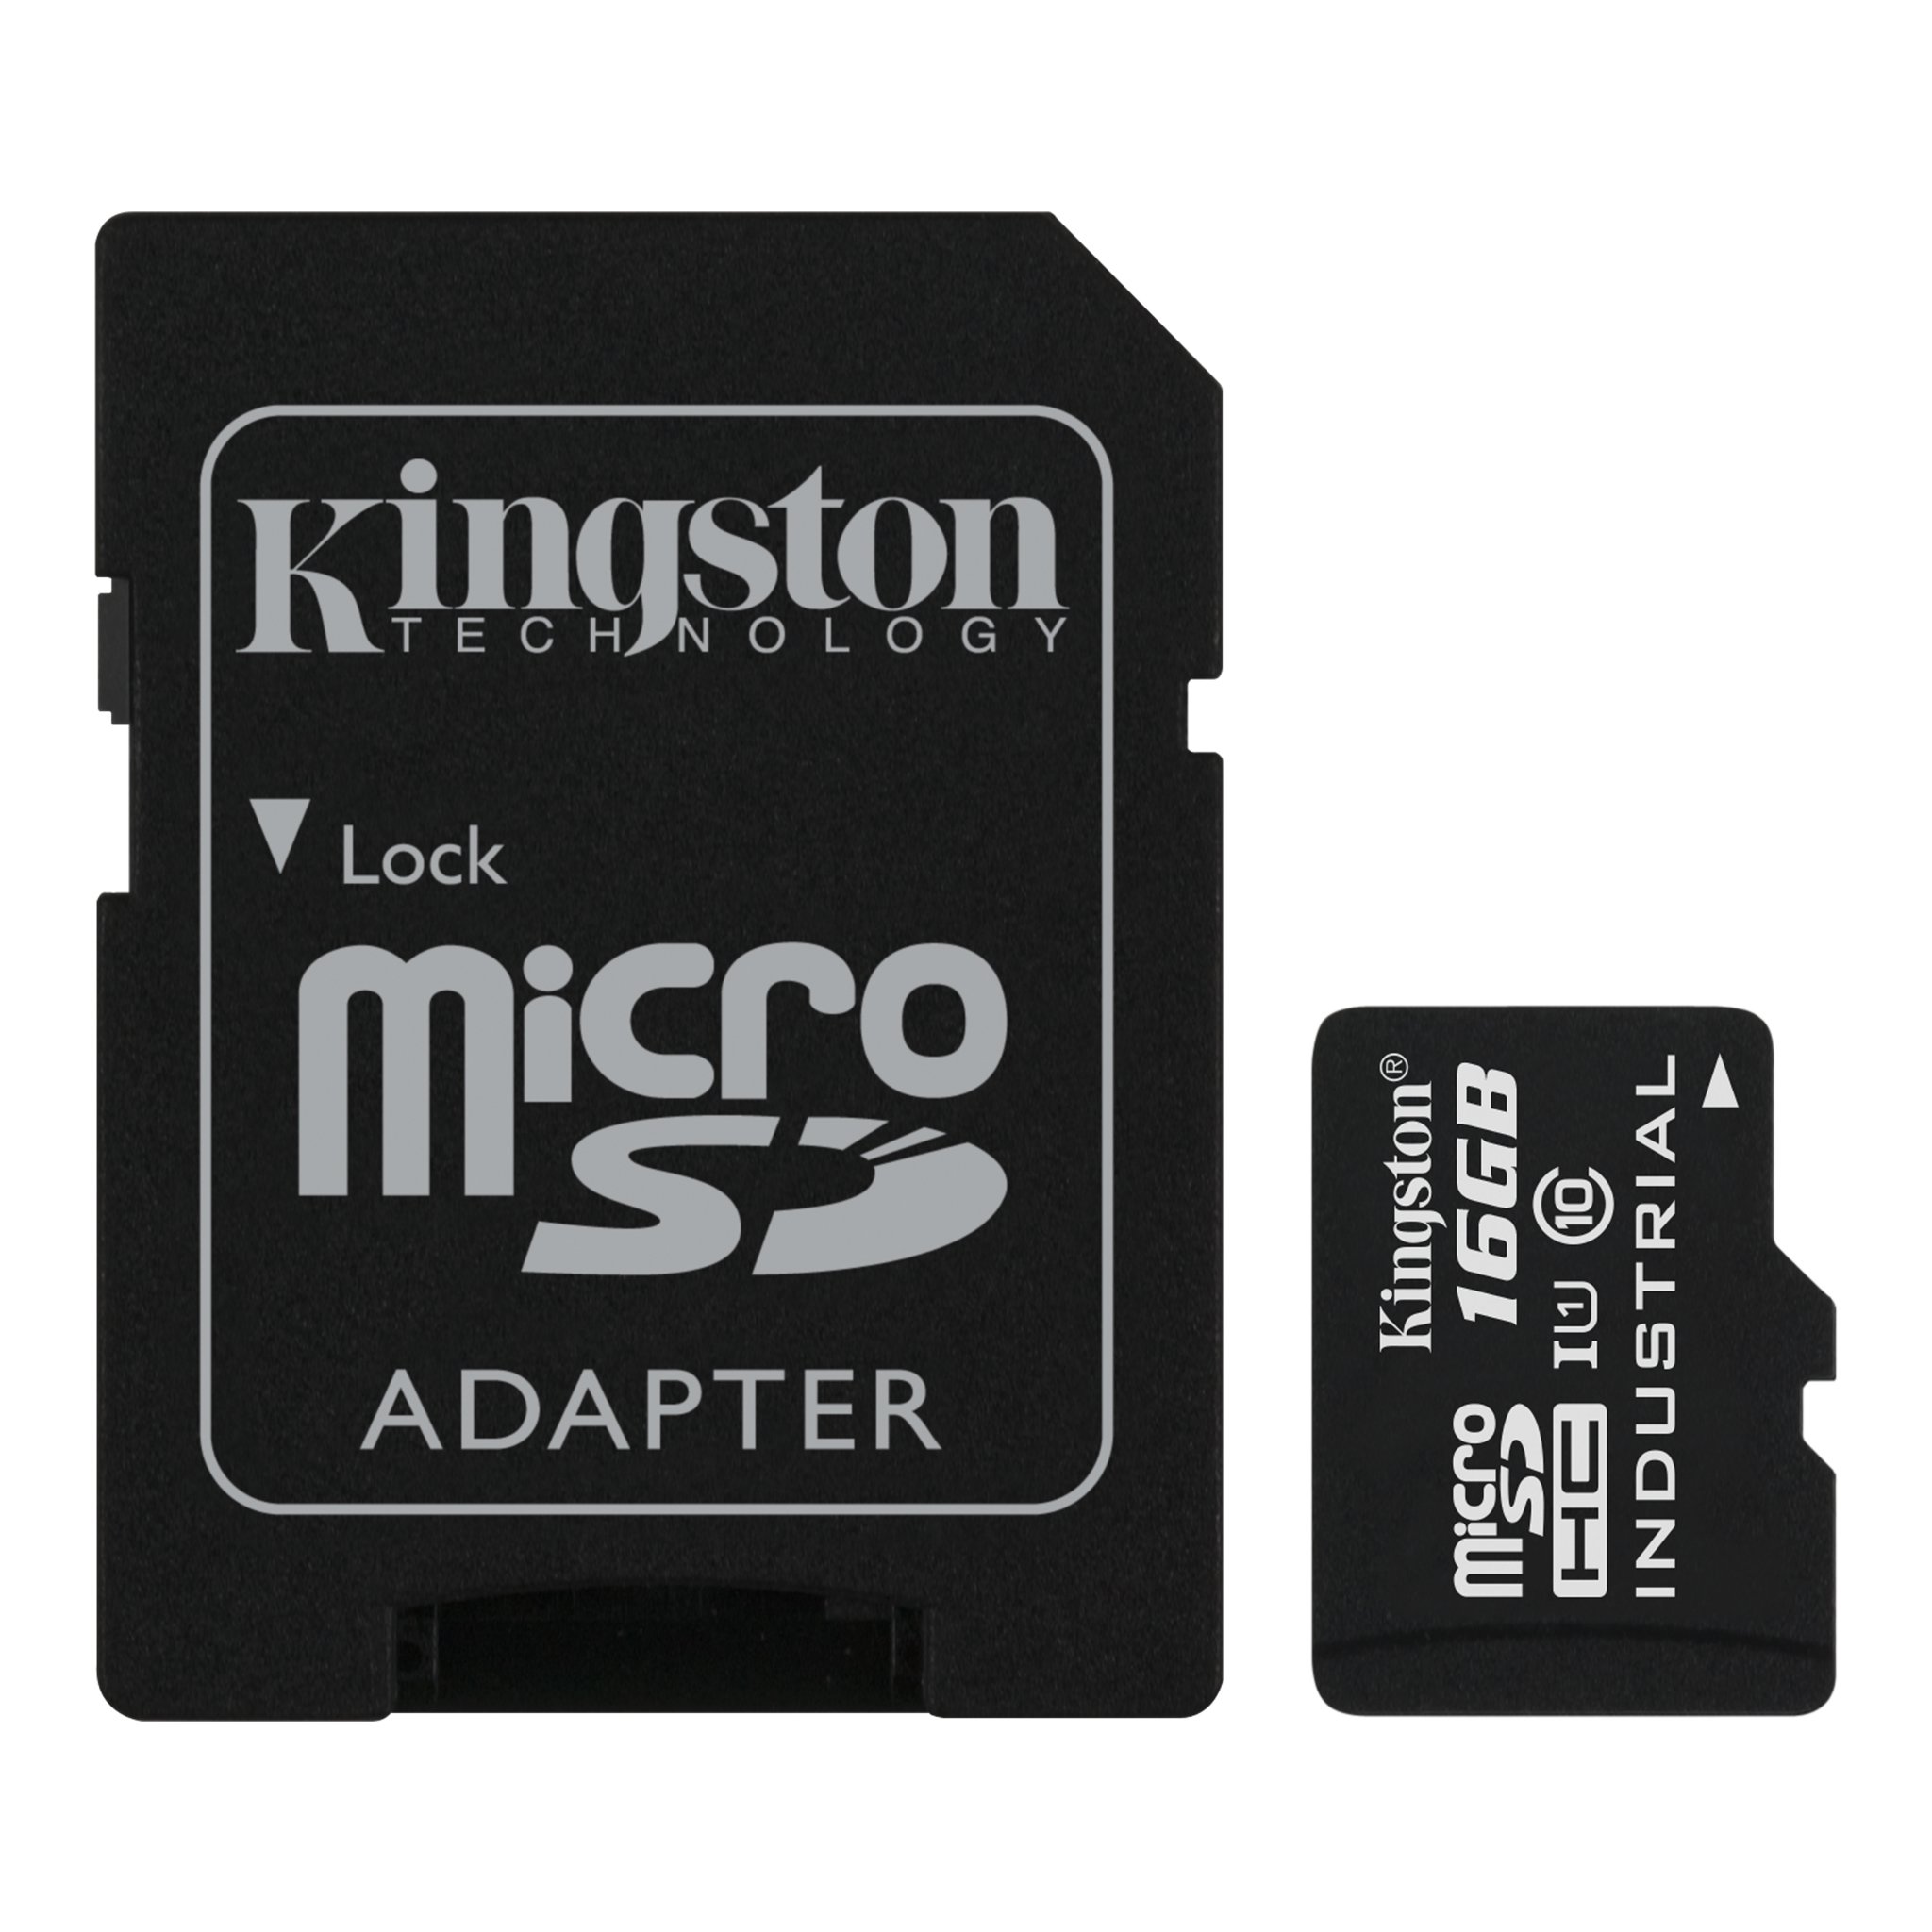 Kingston Sdcit/16gb 16gb Micro Sdhc ( 15x11x1mm ) With Sd Adapter – Industrial Grade For Extreme Condition ( Operating Temperature Rating Of -40c To 85c ) – Uhs-I U1 ( Uhs-I / Sd3.0 ) With Sdmi Read/Write : 90/45mb/Sec – Lifetime Warranty Retail Pack